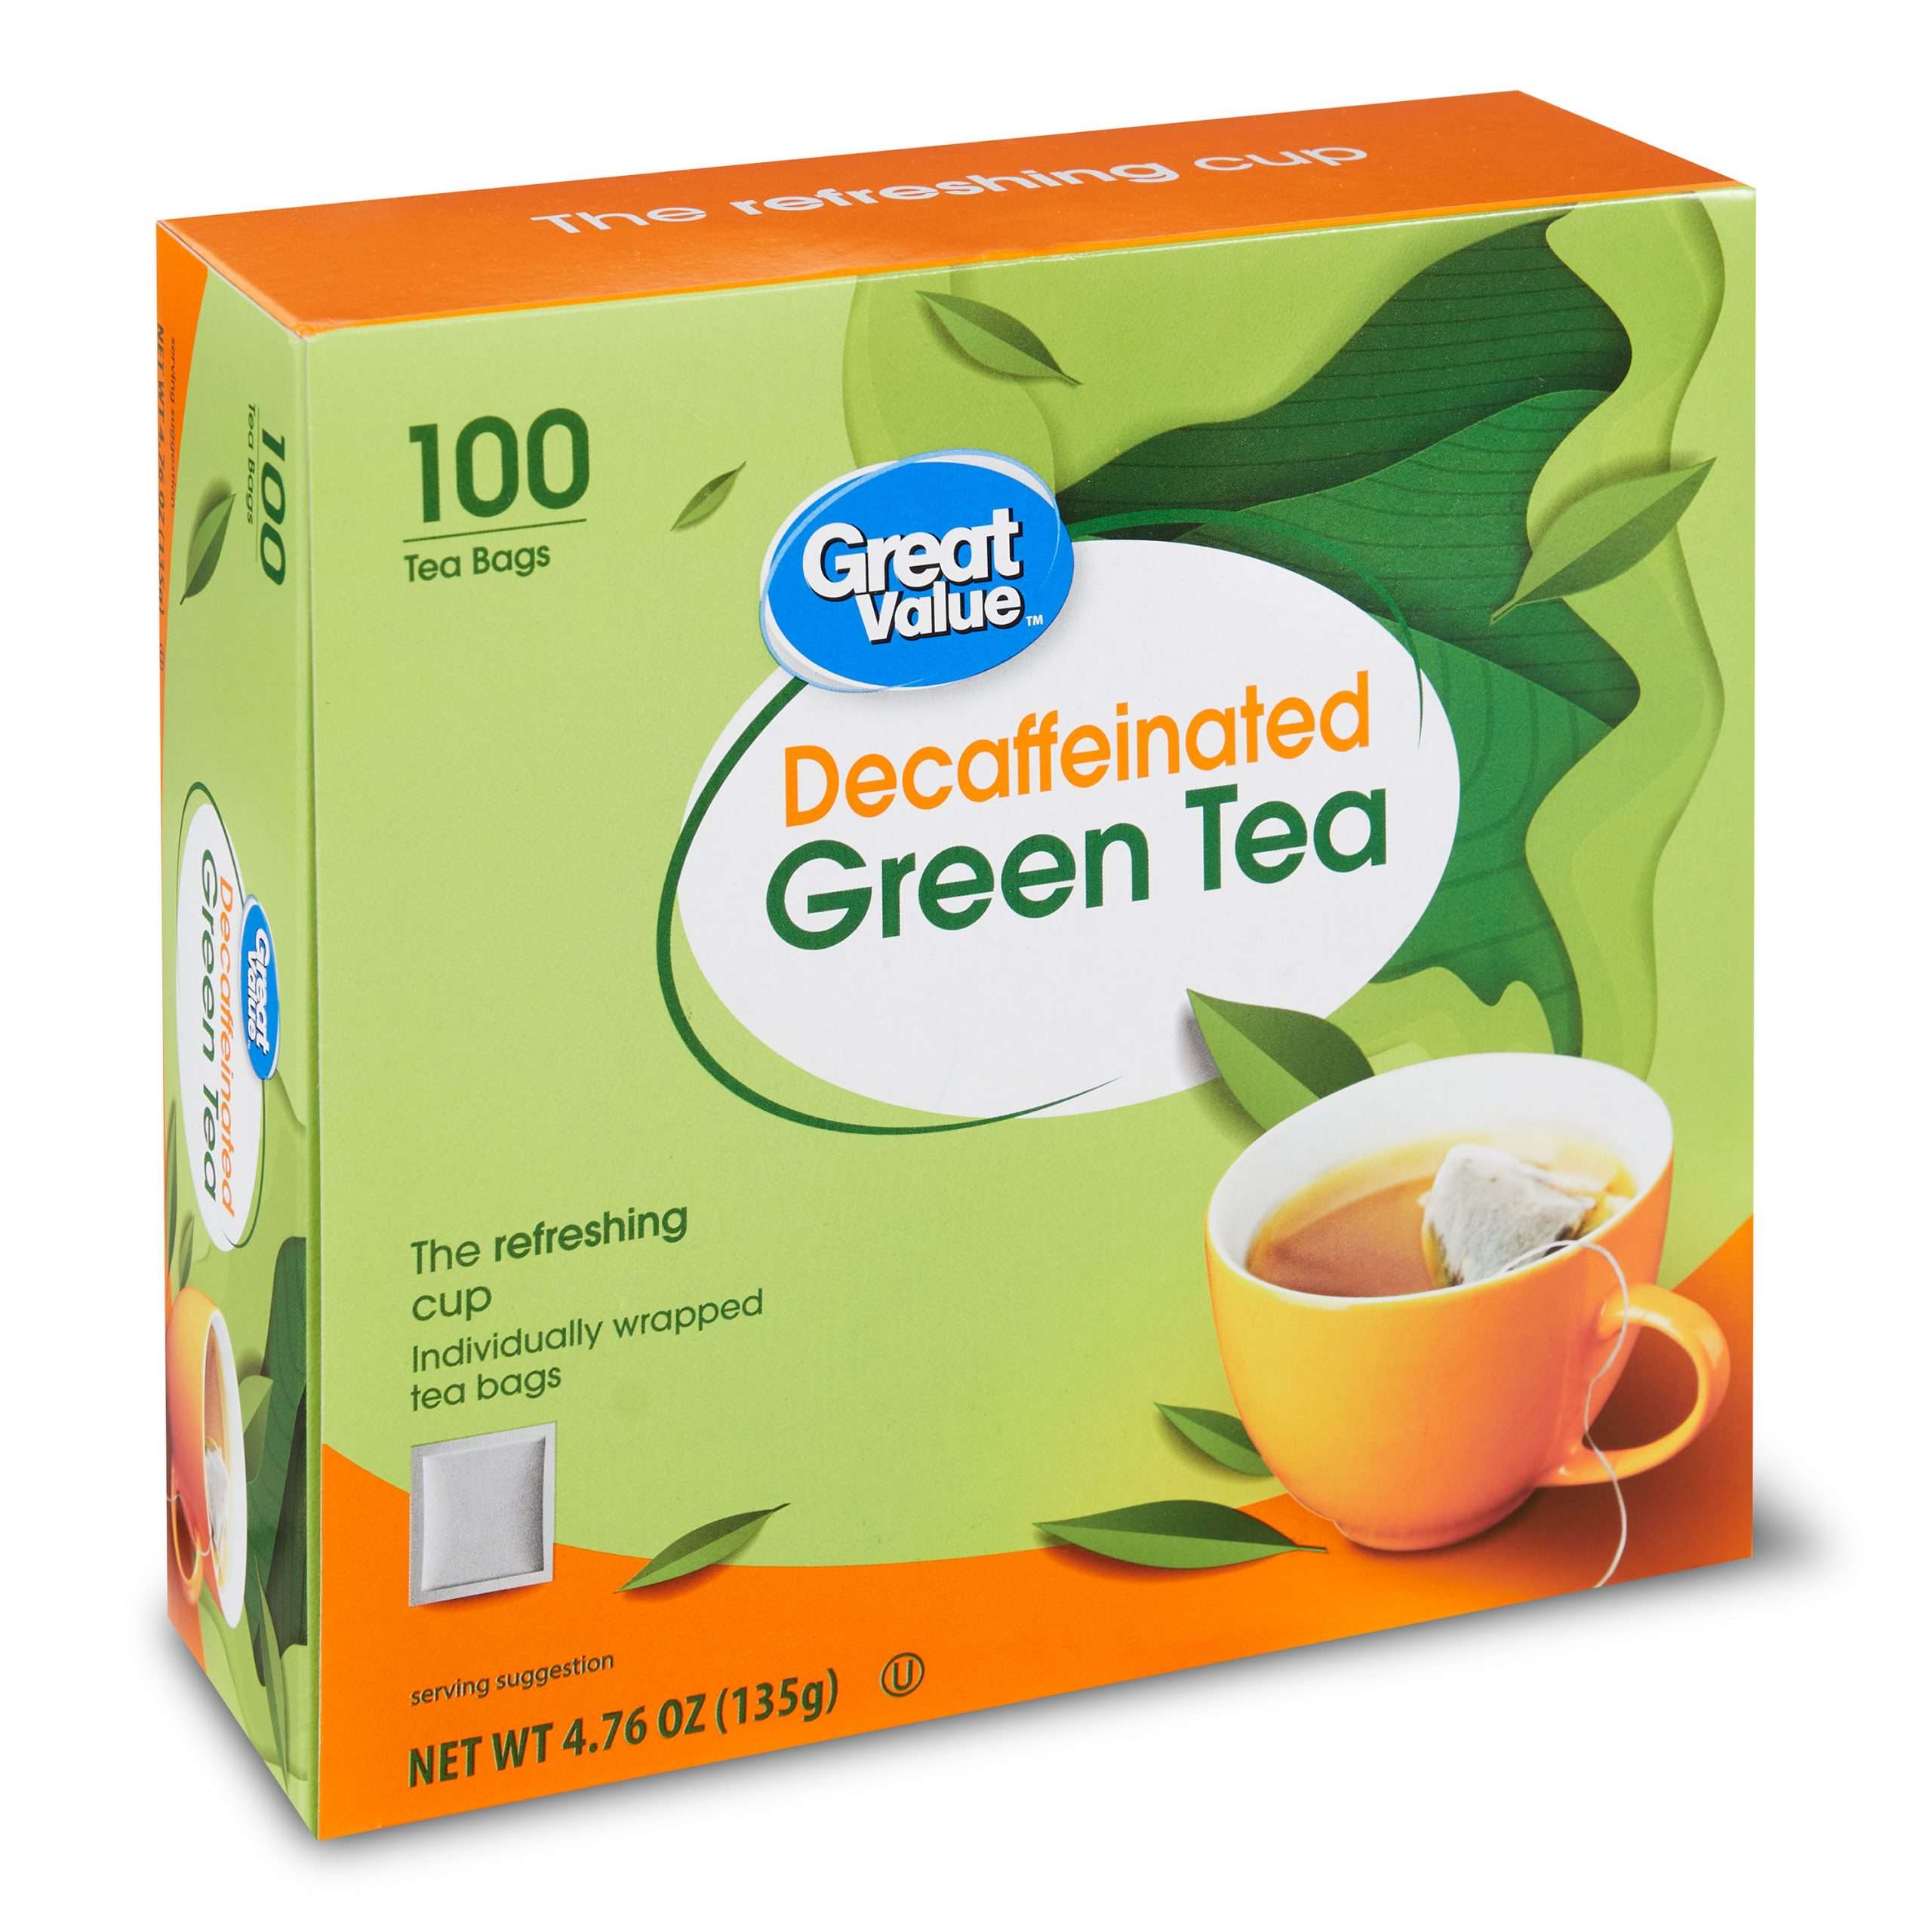 Great Value Decaffeinated Green Tea Bags, 4.76 oz, 100 Count